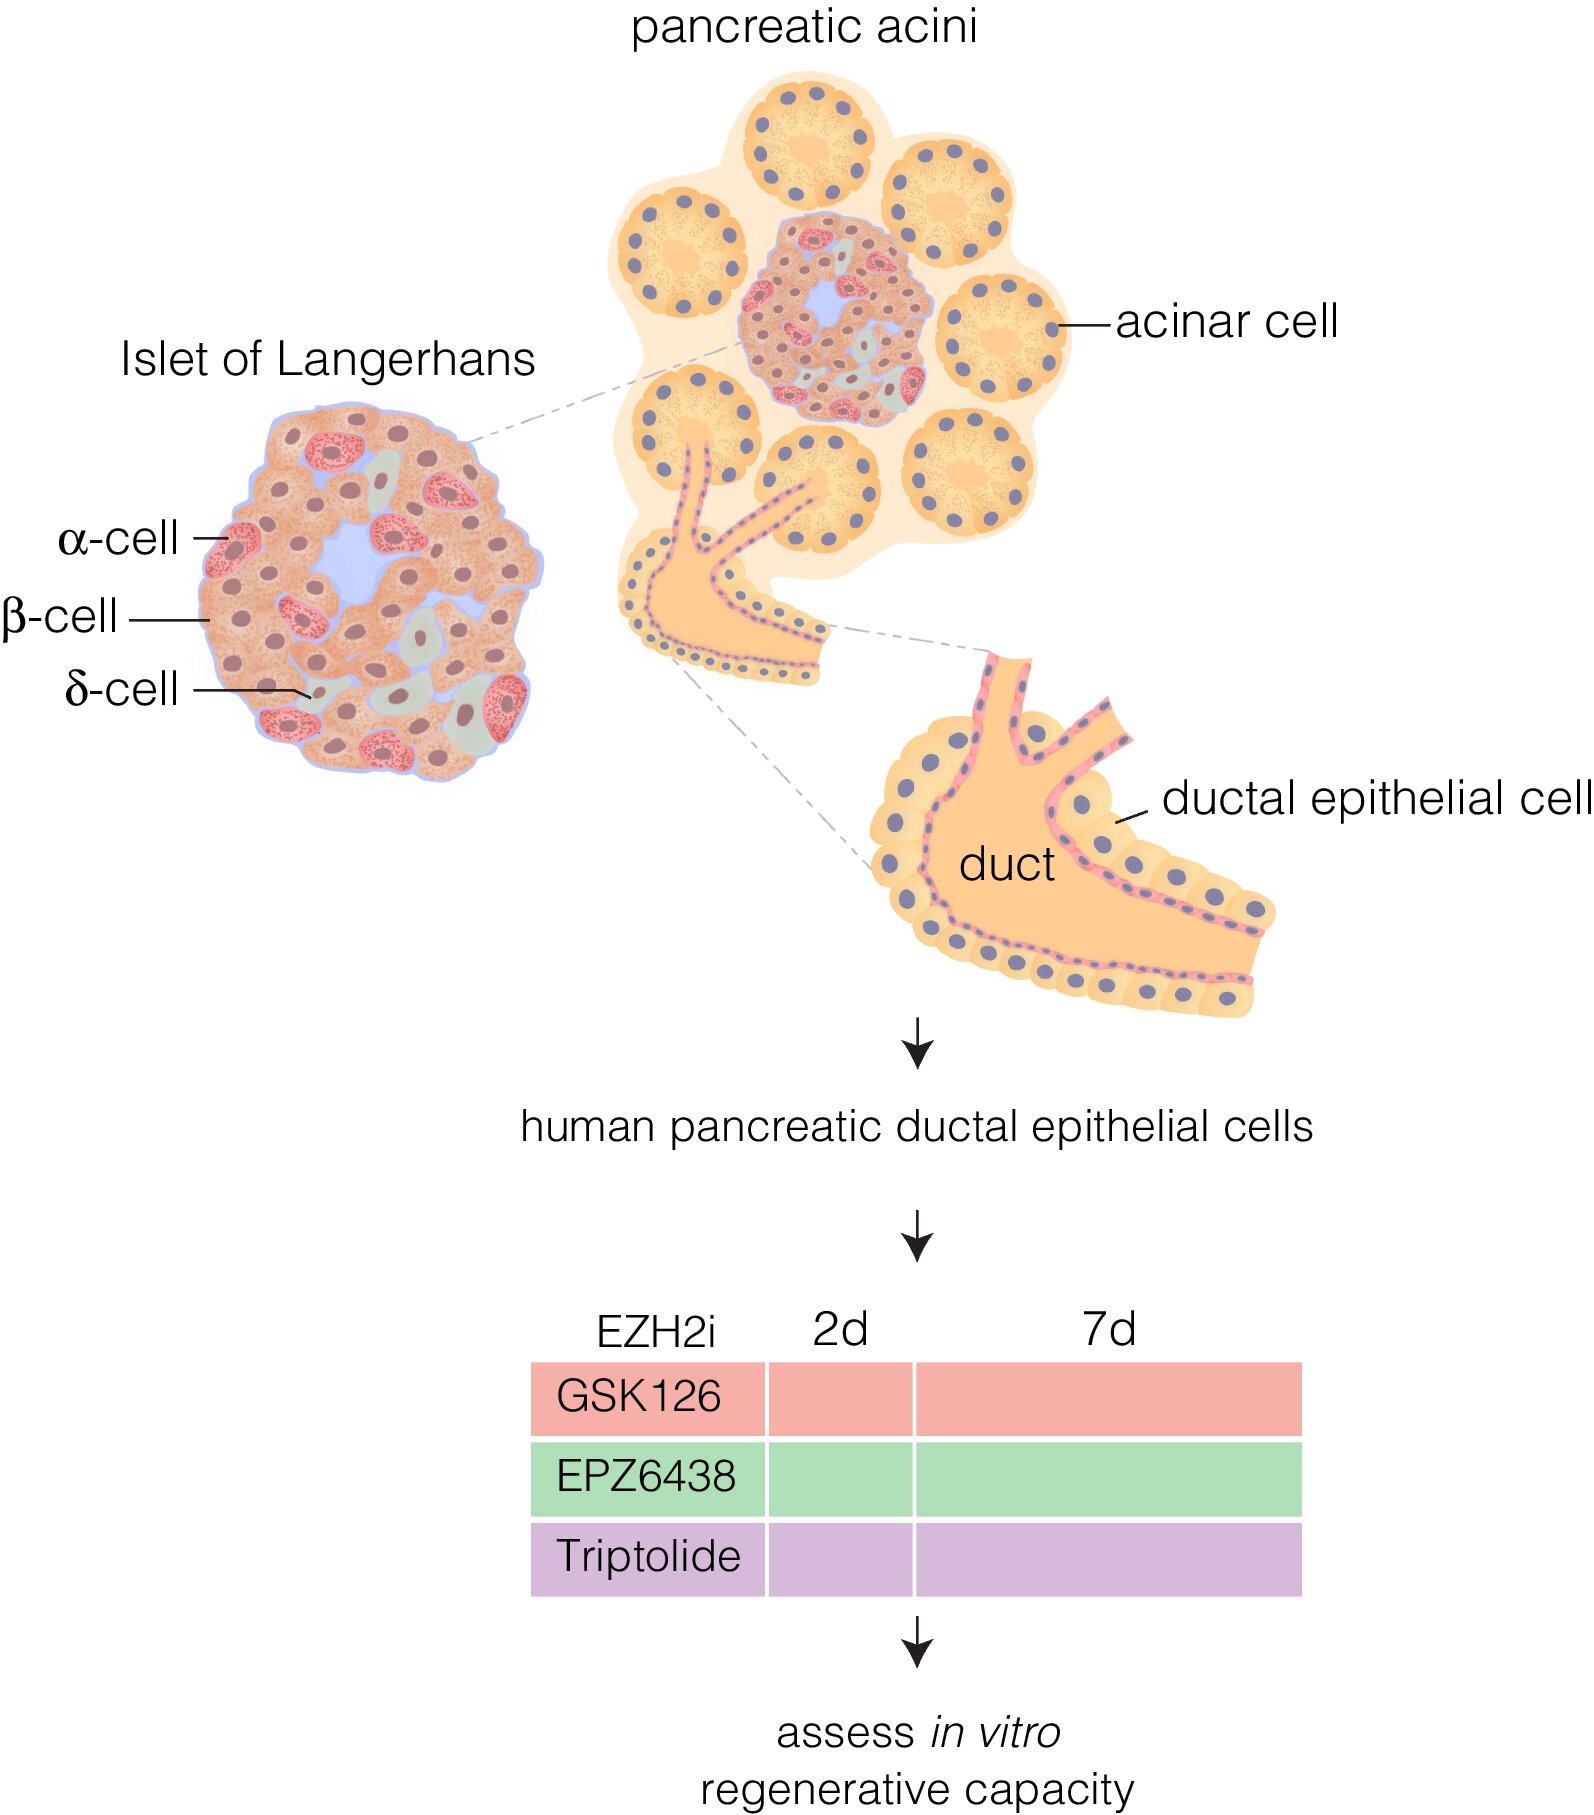 Pancreatic β cell regeneration induced by clinical and preclinical agents